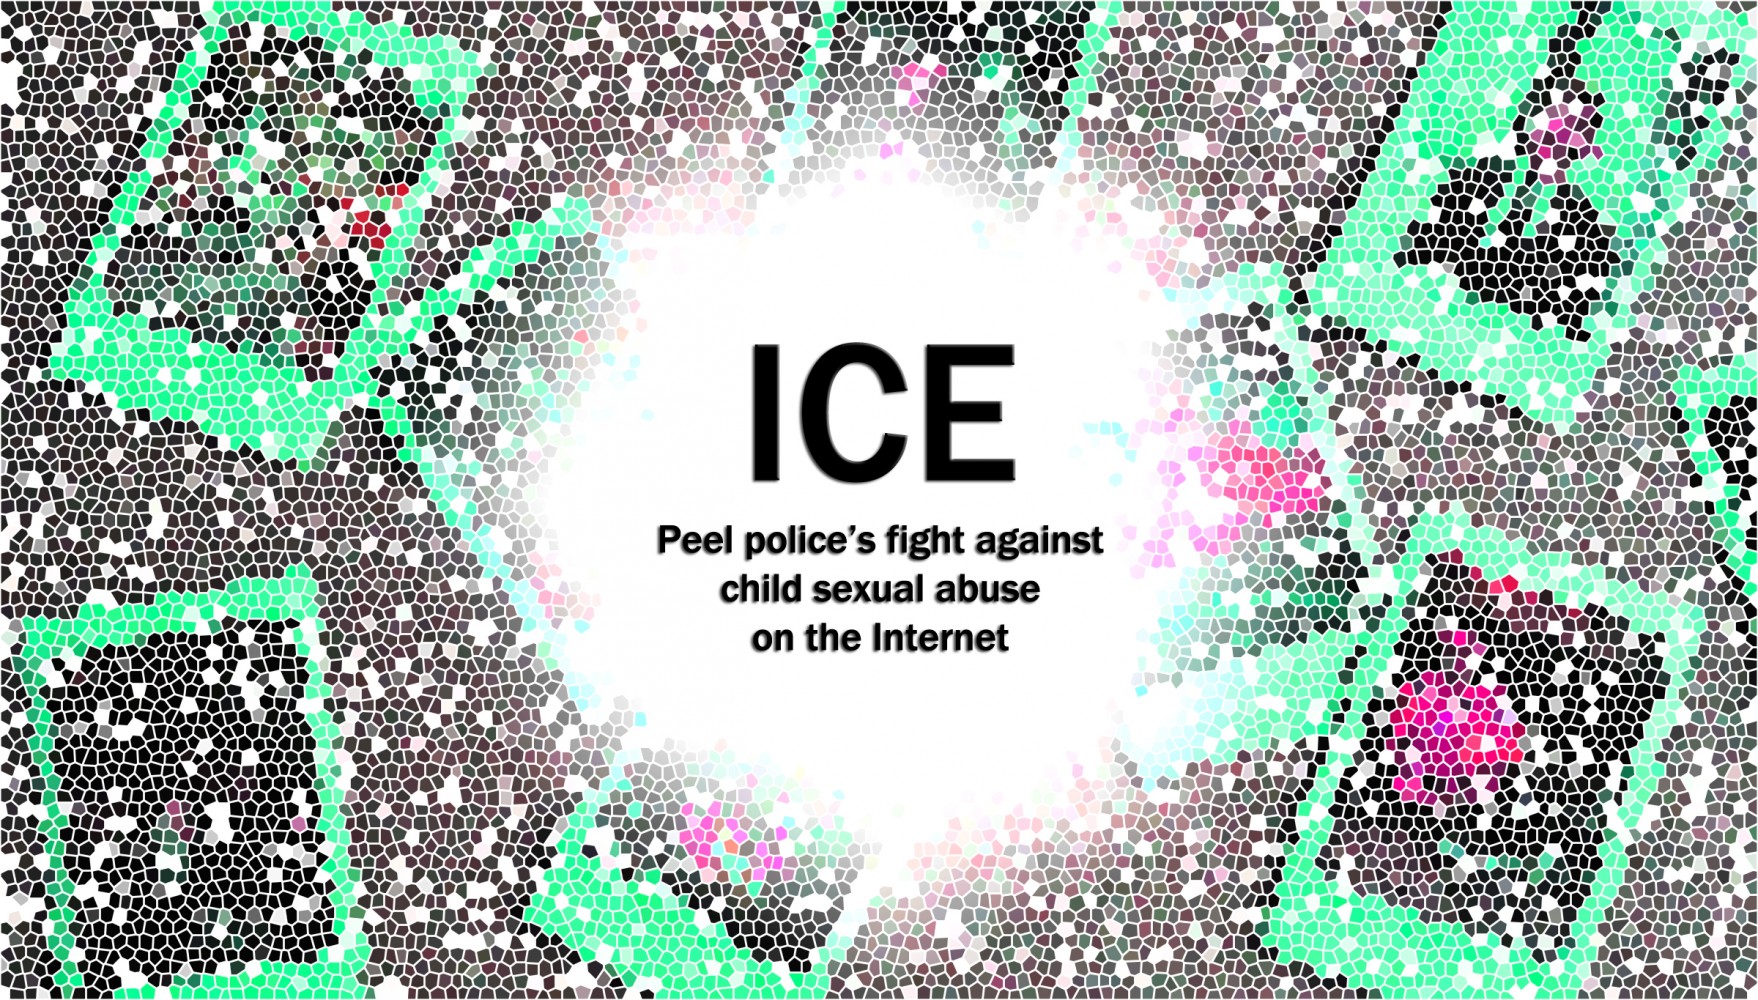 Parents, please read this: Peel police ICE unit facing an alarming surge of child exploitation online